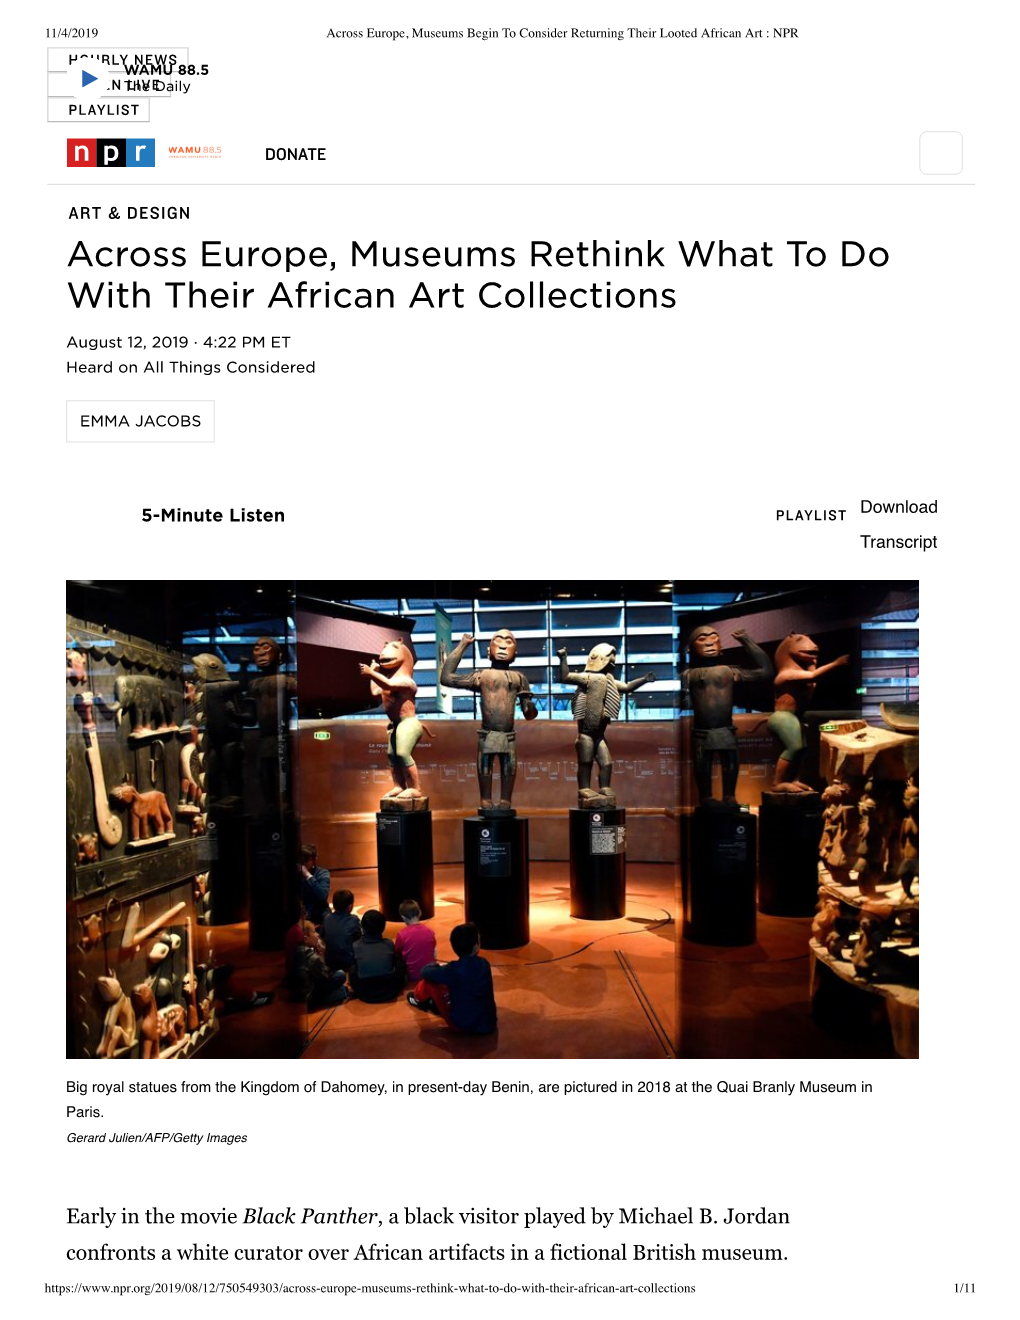 Museums Rethink Their African Art Collections